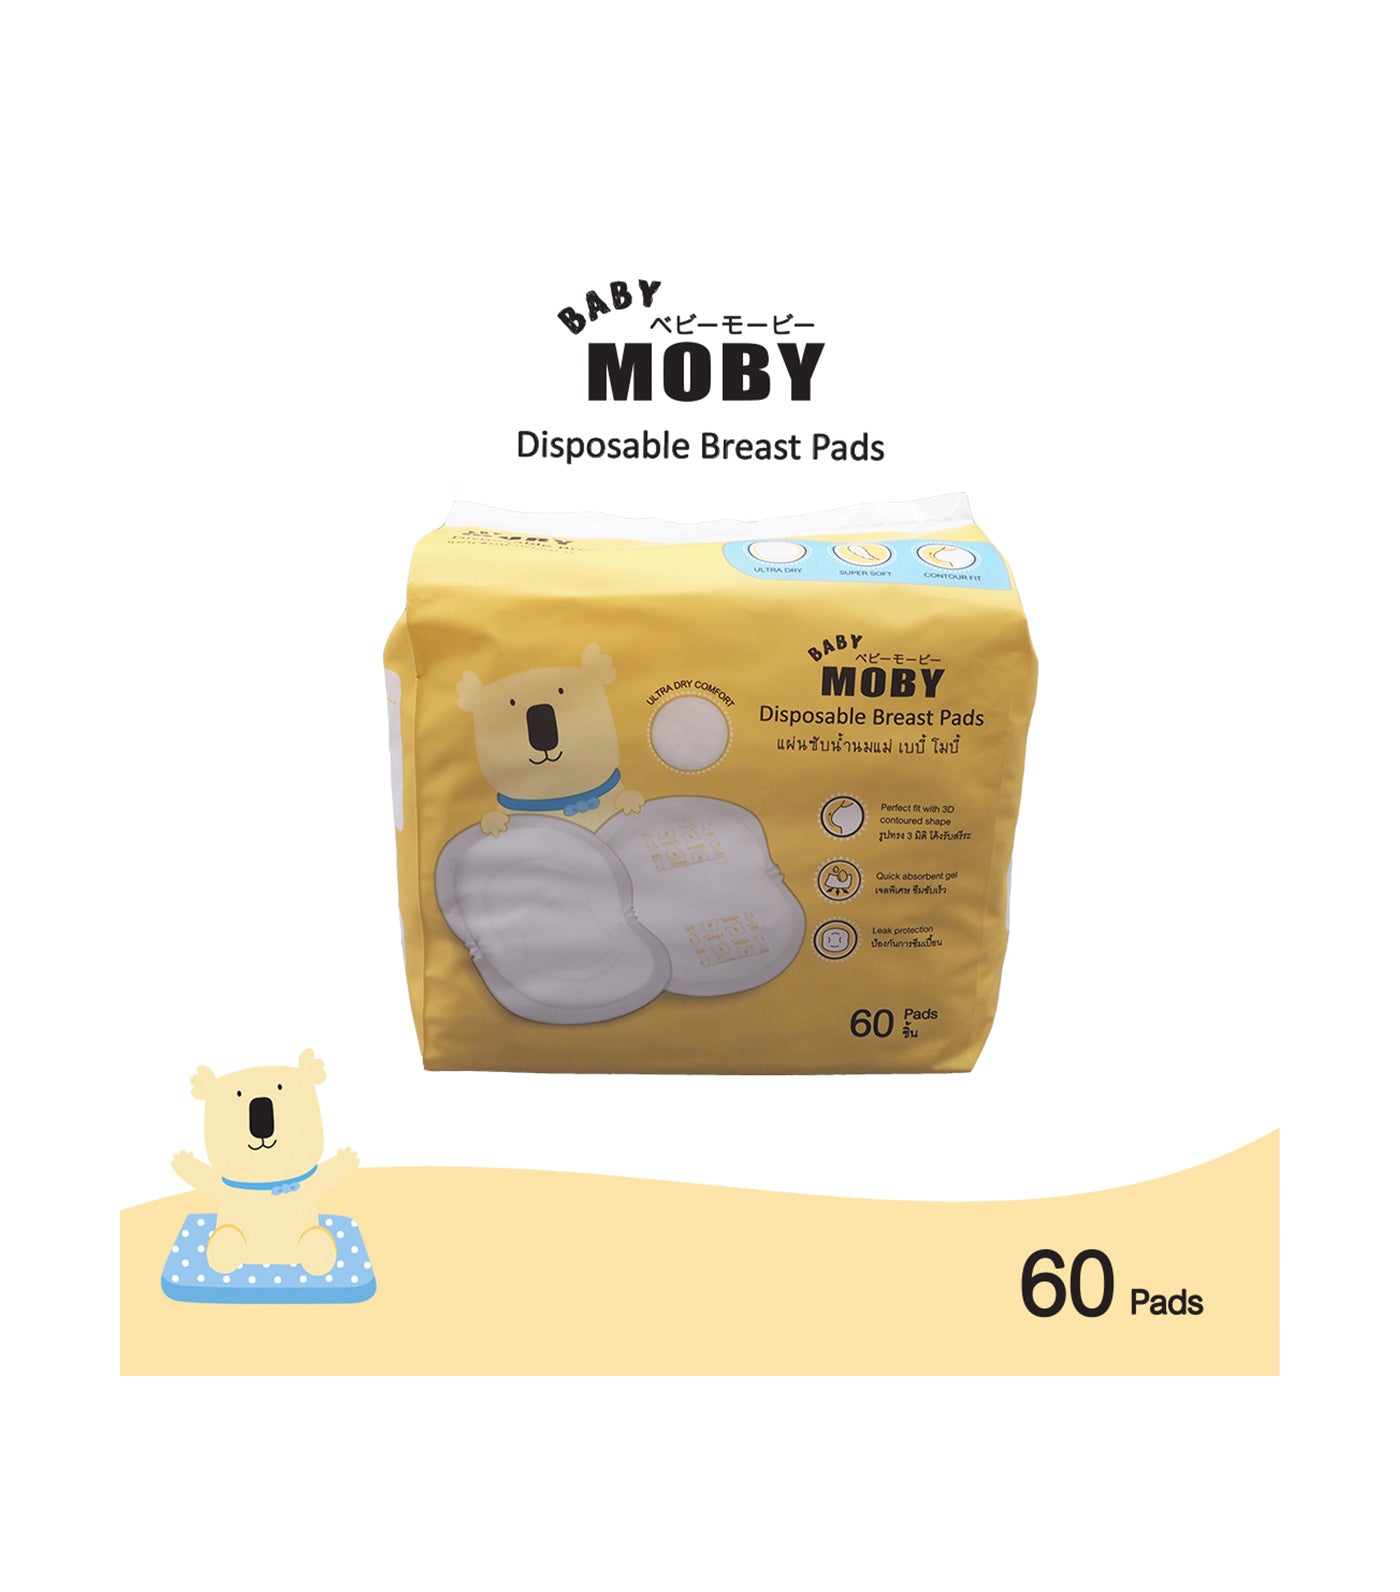 Medela Safe and Dry Disposable Nursing Pads - Ultra-absorbent, discreet nursing  pads, Pack of 60 individually wrapped breast pads